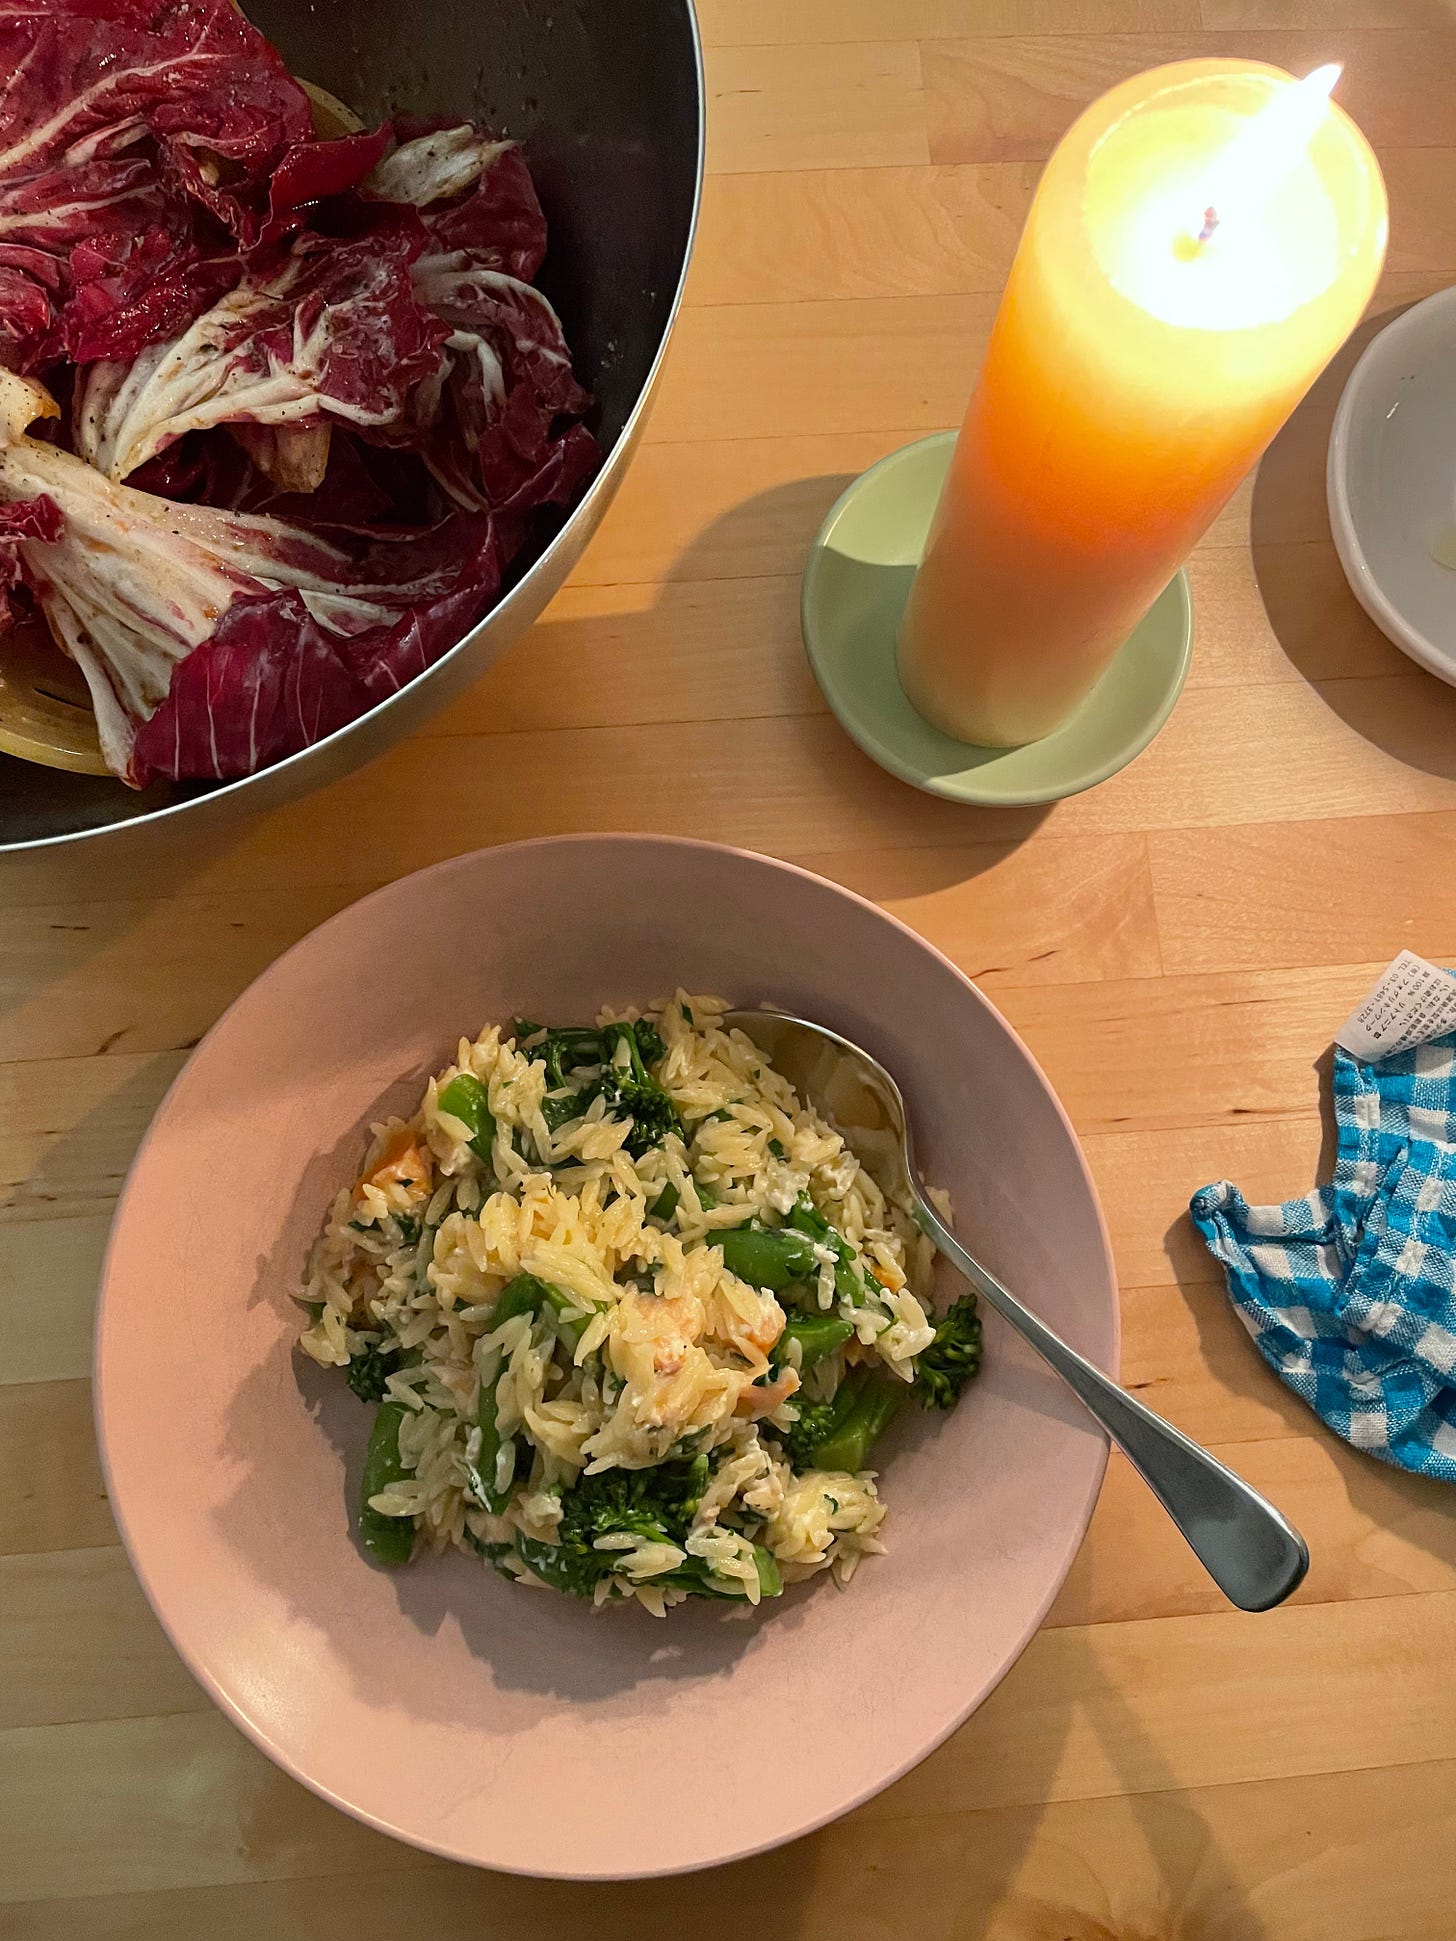 A bowl of cold-smoked salmon risoni with baby spinach. A column candle lights the dinner scene. A blue and white chequered napkin nearby. The meal is accompanied by a big bowl of raddichio salad topped with lots of pepper, olive oil and balsamic vinegar.